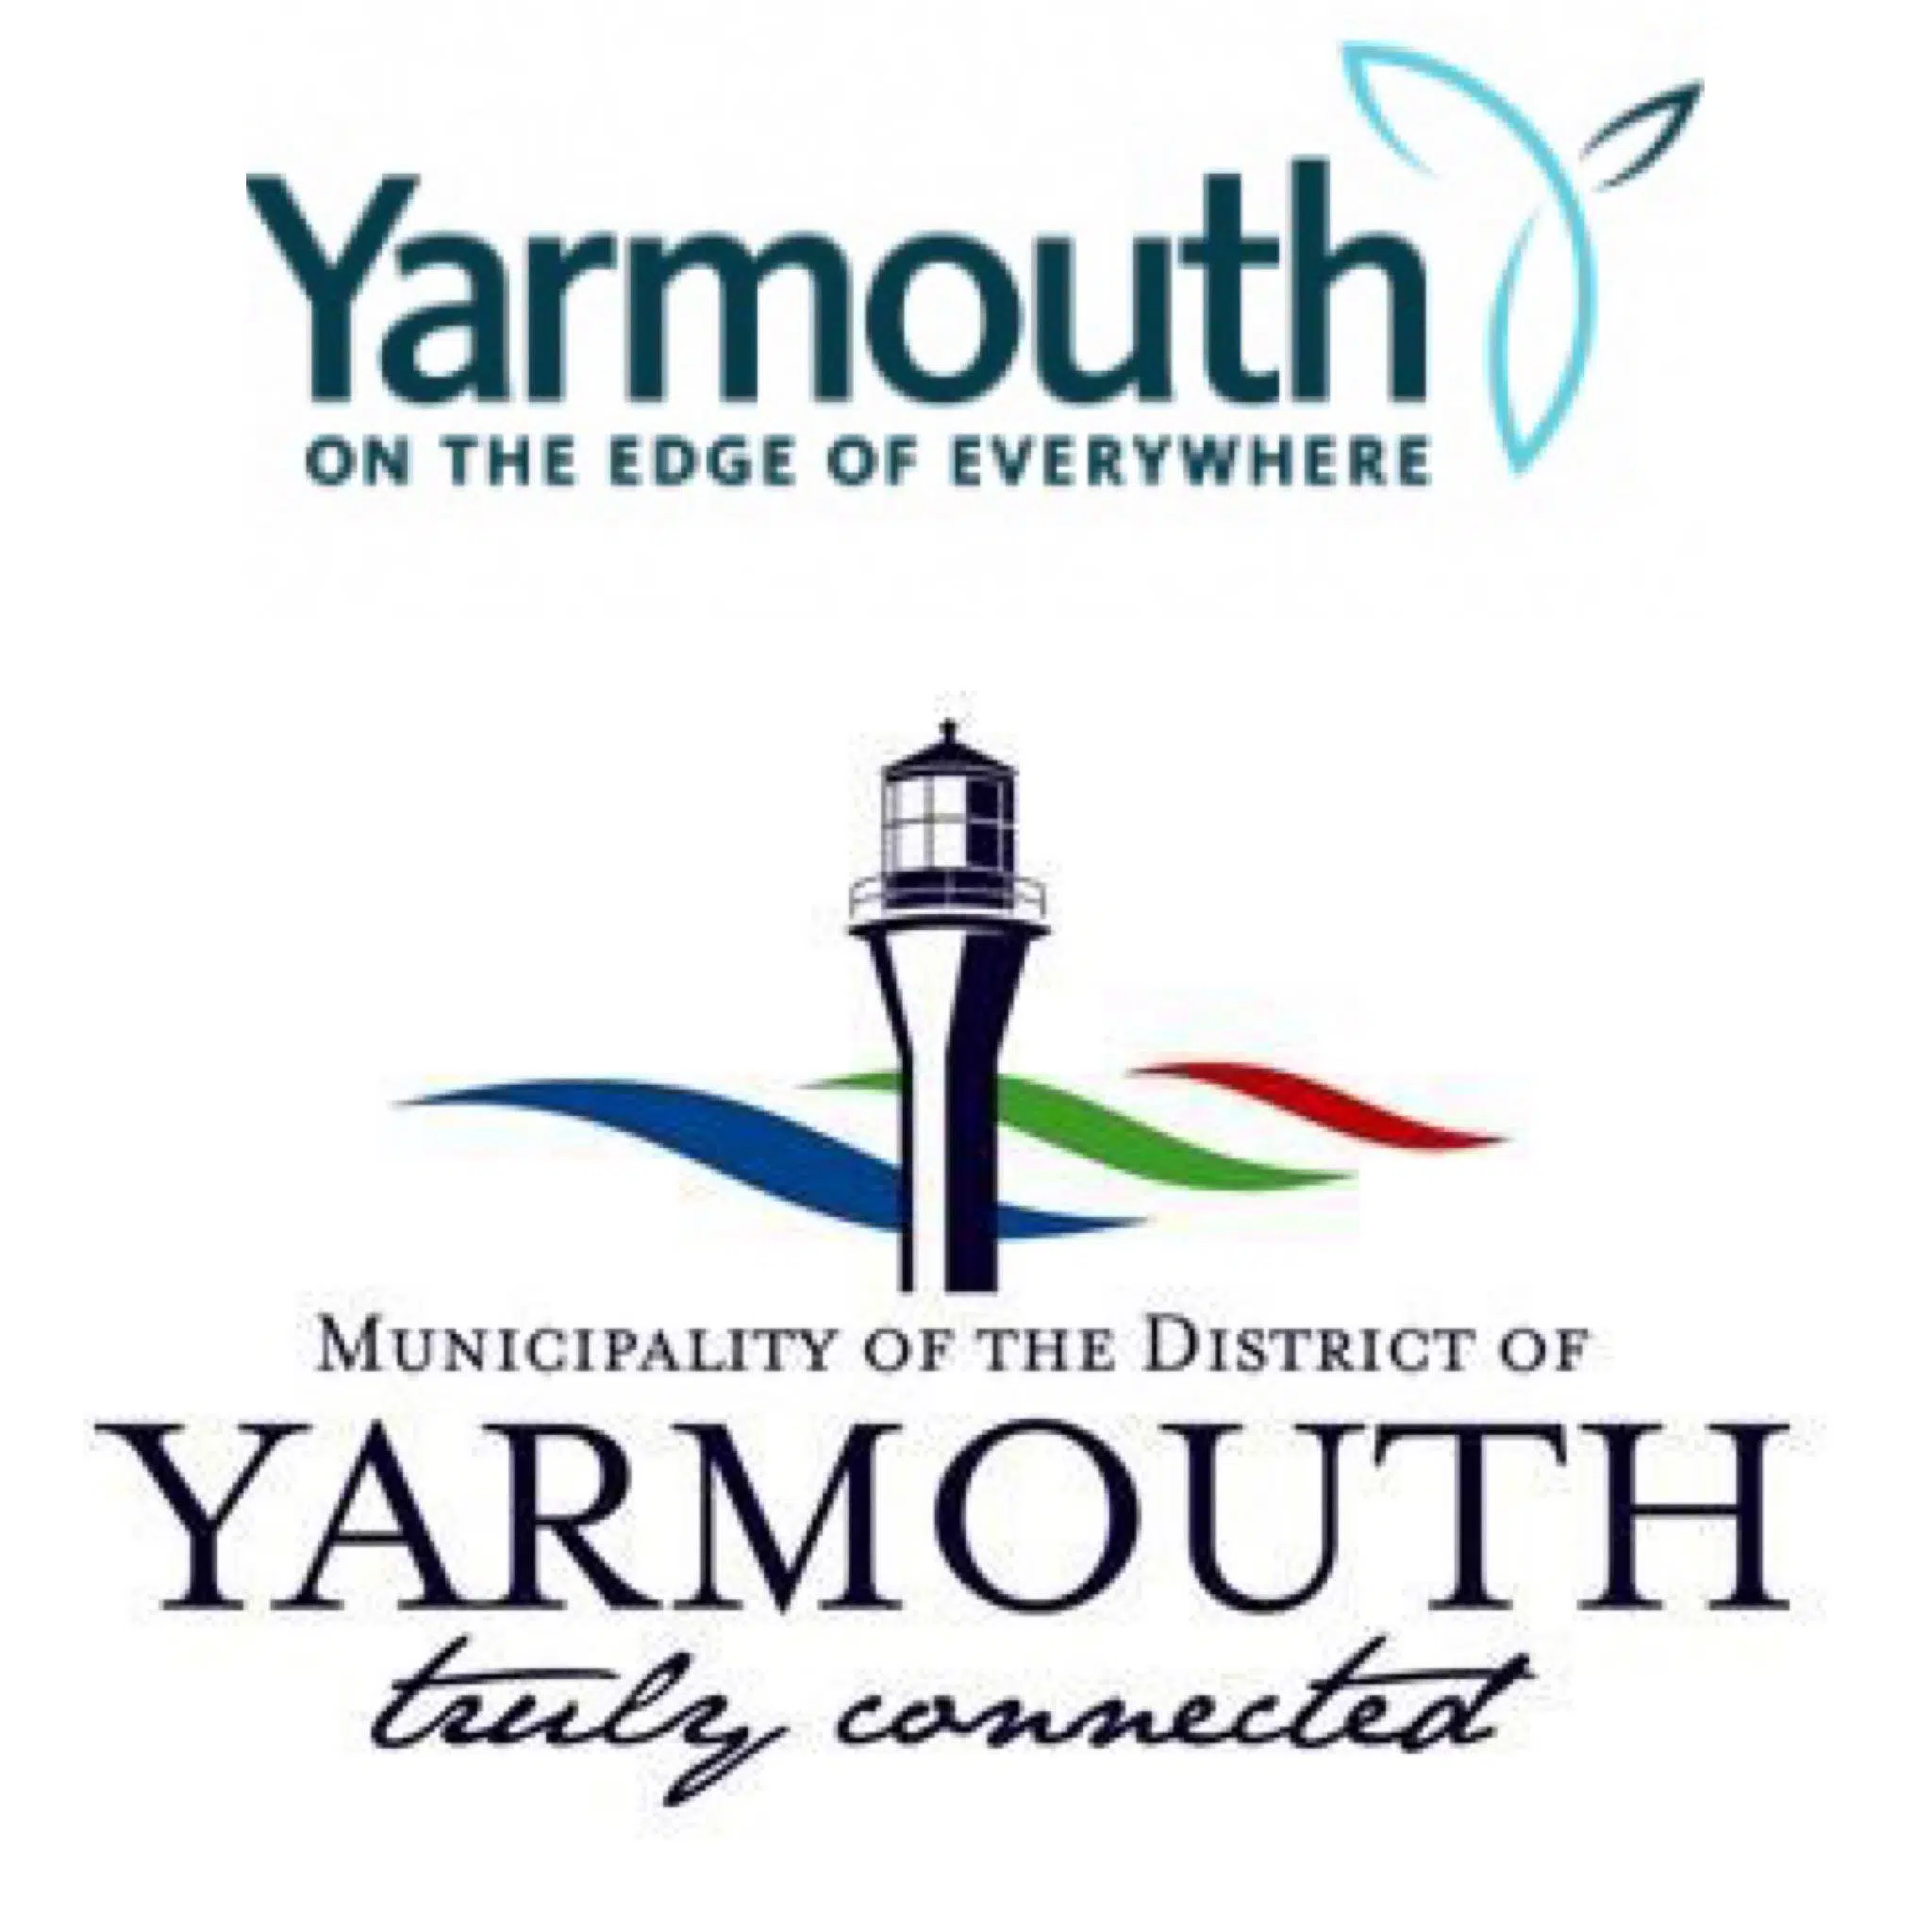 Town and Municipality of Yarmouth Explore Questions About Possible Merger